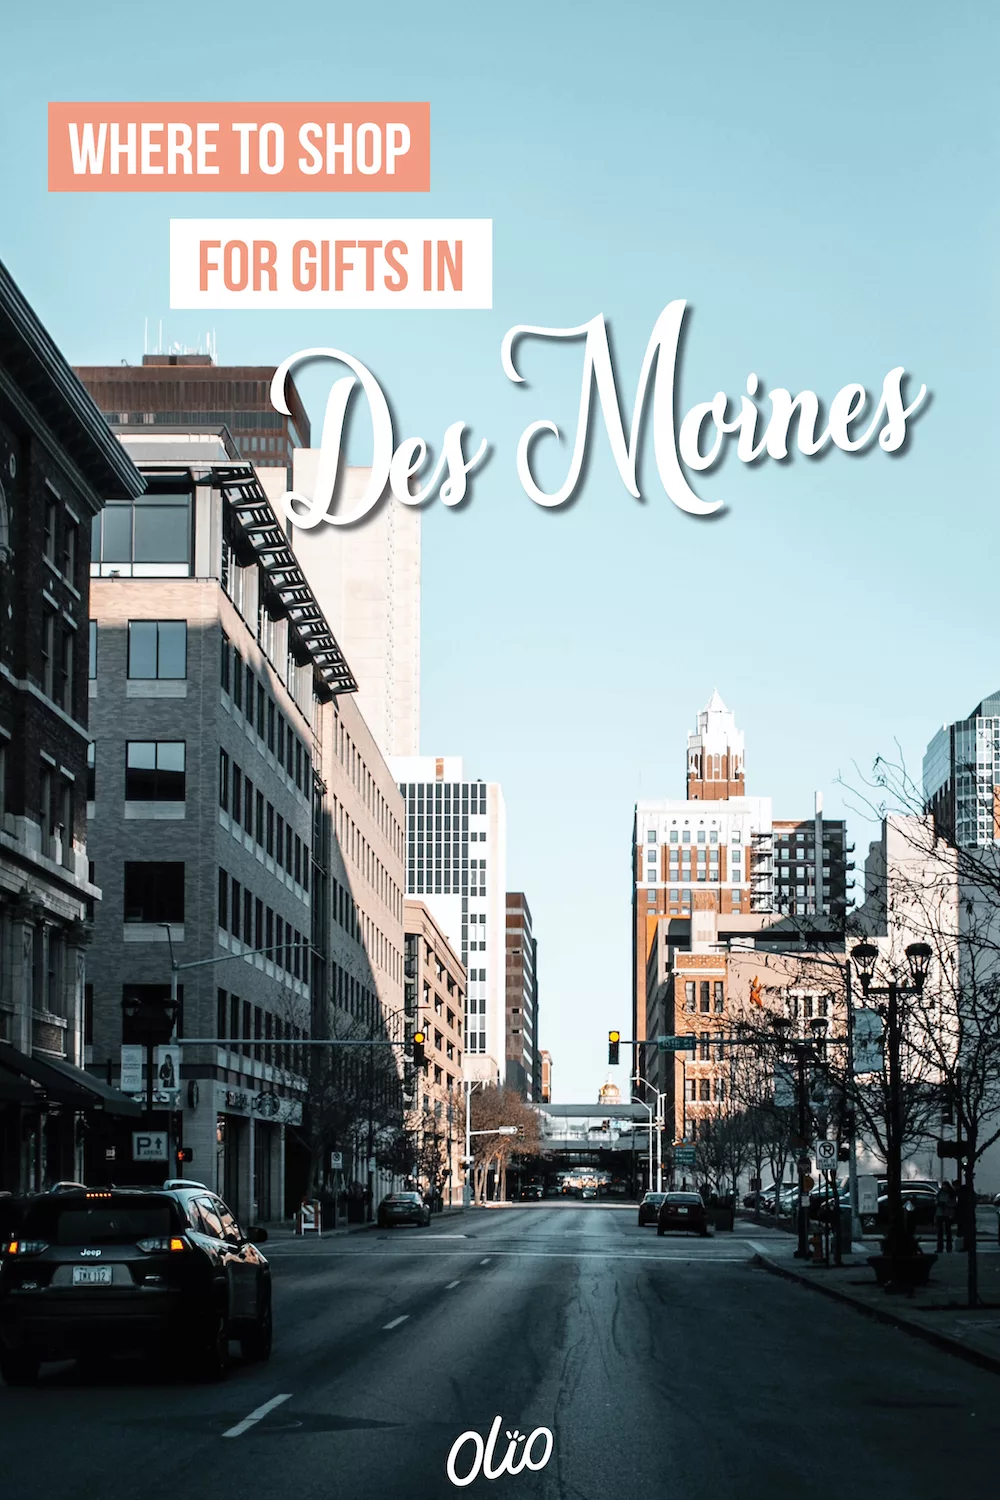 Want to shop local but not sure where to start? Find the perfect present for any person or occasion at this incredible collection of places to shop for gifts in Des Moines, Iowa. #DesMoines #Iowa #BuyLocal #ShopSmall